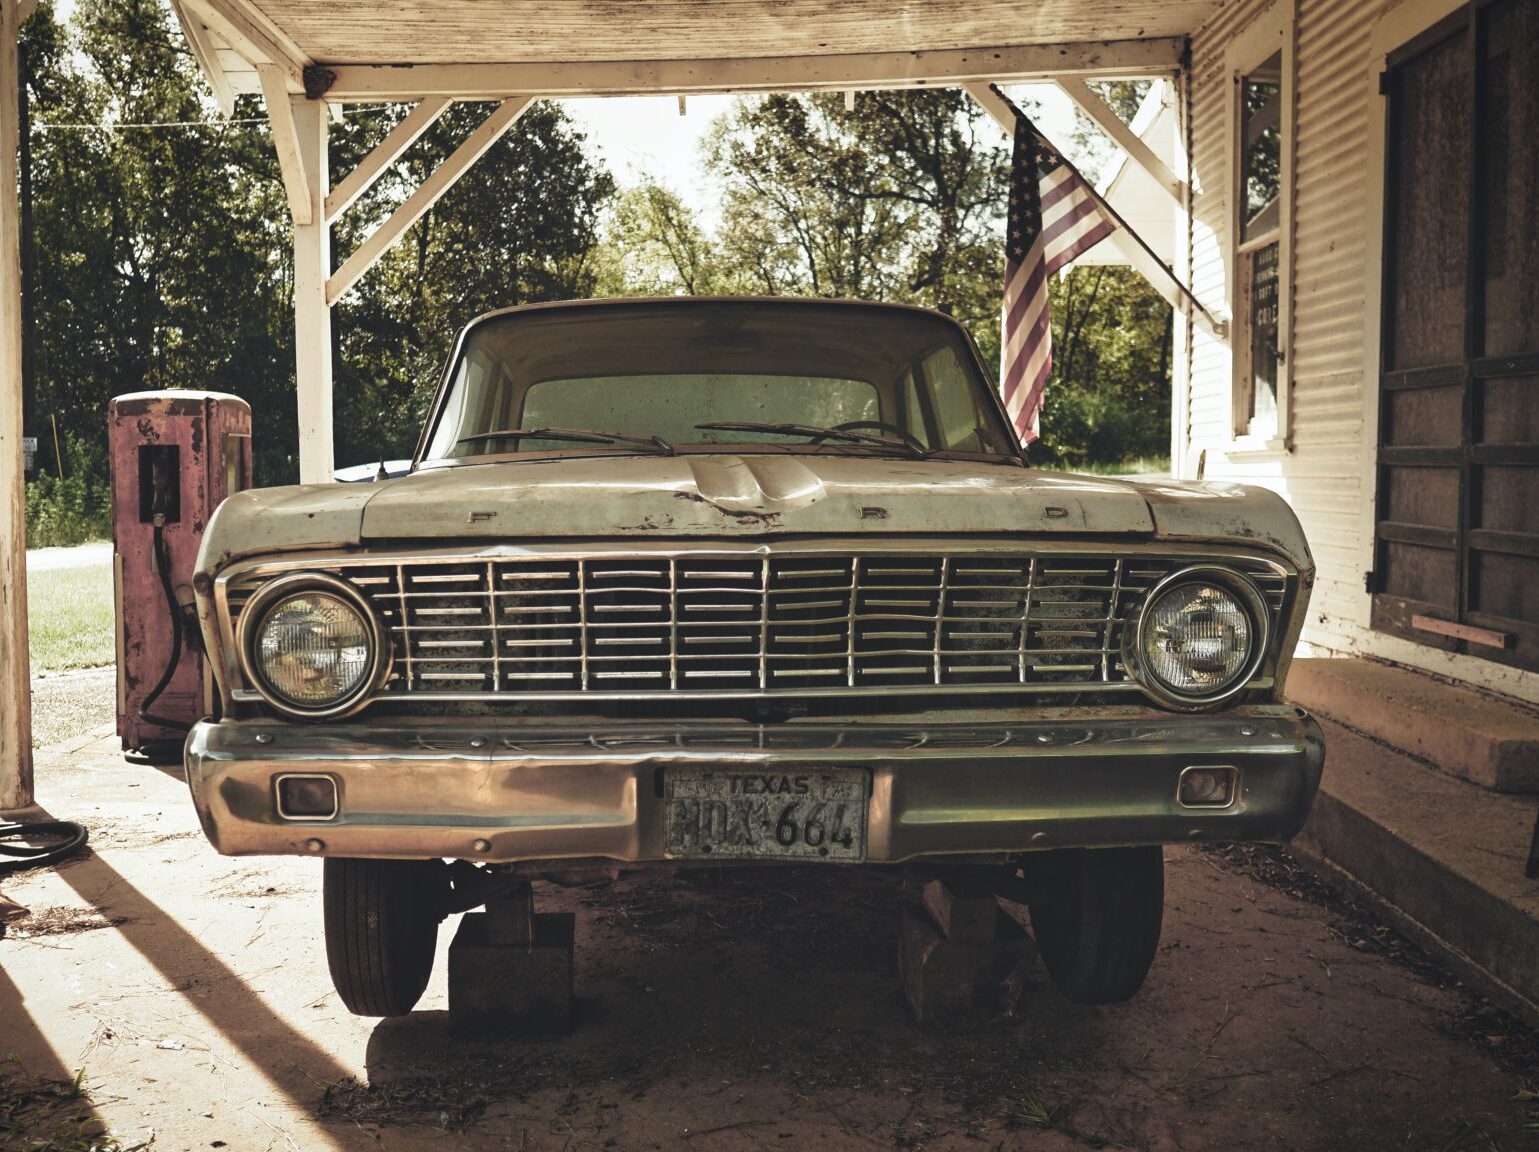 old truck in carport with American flag in background